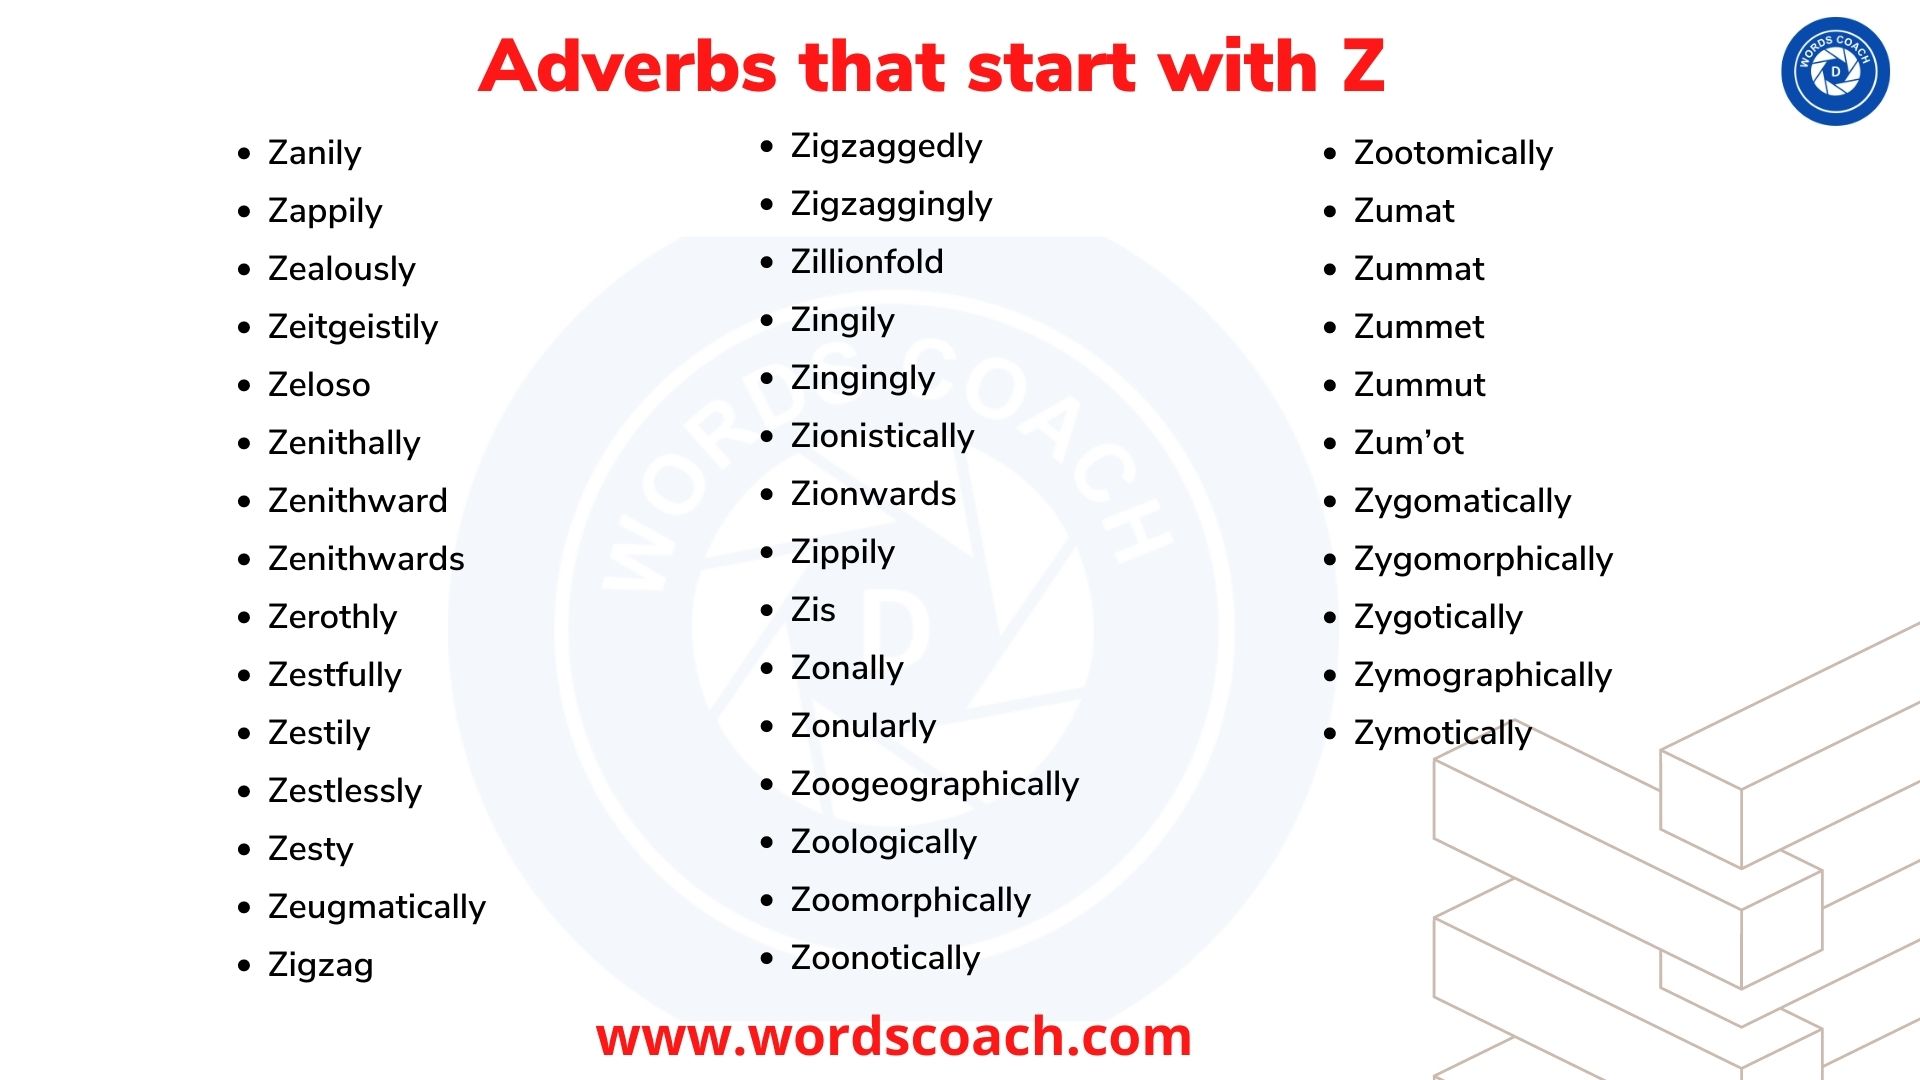 Adverbs that start with Z - wordscoach.com